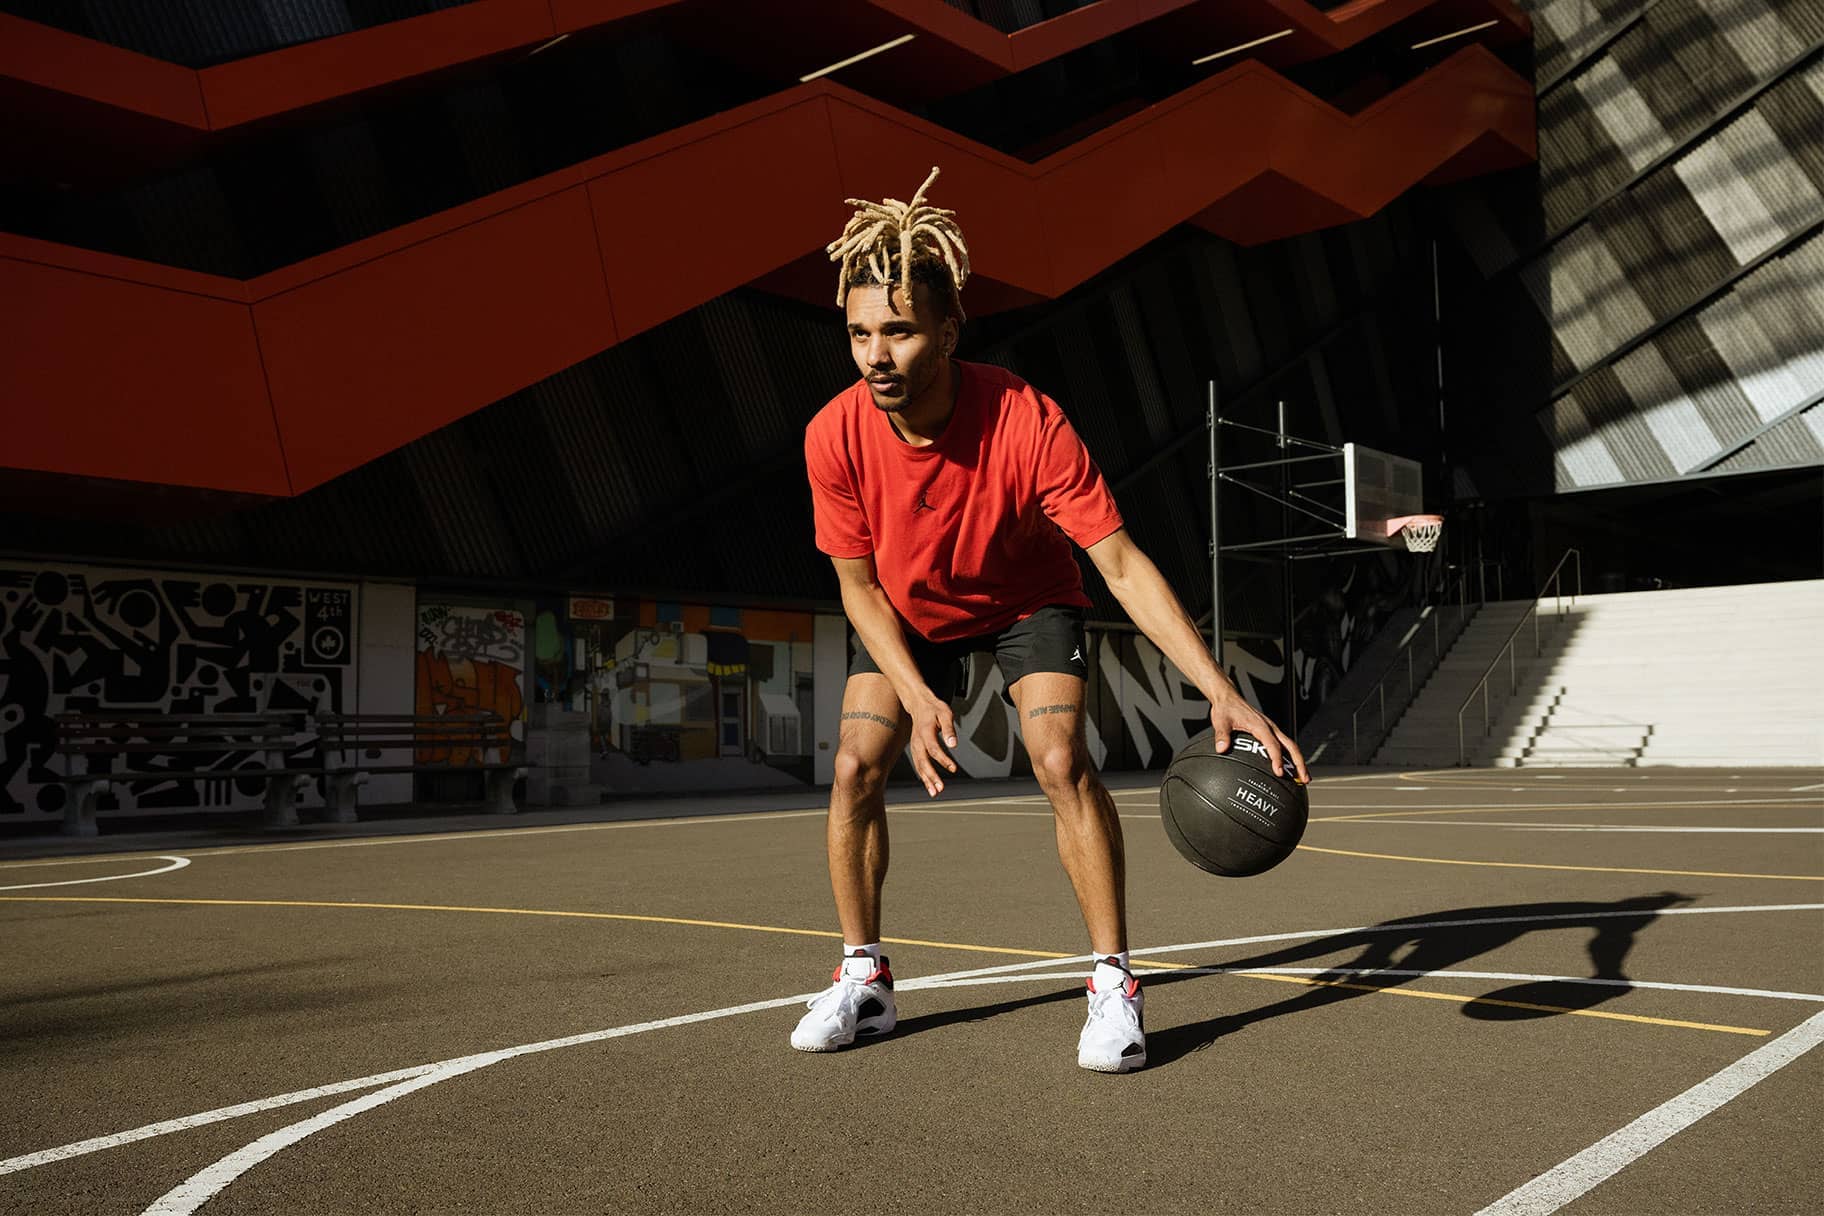 5 Benefits of Playing Basketball, According to Experts. Nike IN